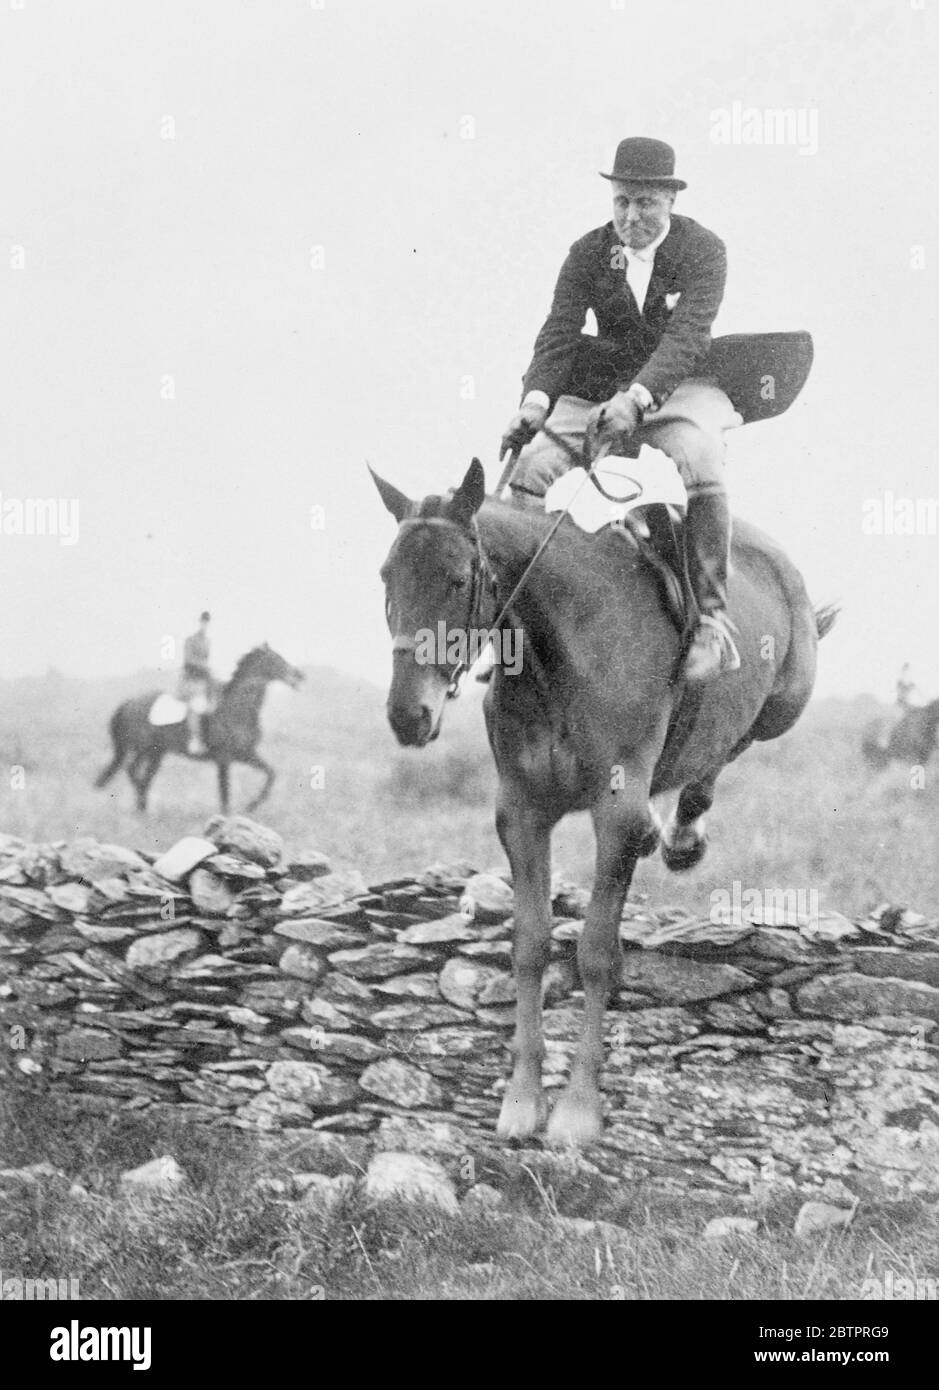 America's hunting, Minister to Eire. Mr John Cudahy , newly appointed United States Minister to Eire (Ireland) is a keen follower of the hunt and has rapidly become very popular in hunting and social circles in County Dublin. Photo shows, Mr John Cudahy , leaves his saddle as his mount takes a stone wall while out with the North Kildare Hounds at Punchestewn, Eire. 4 January 1938 Stock Photo